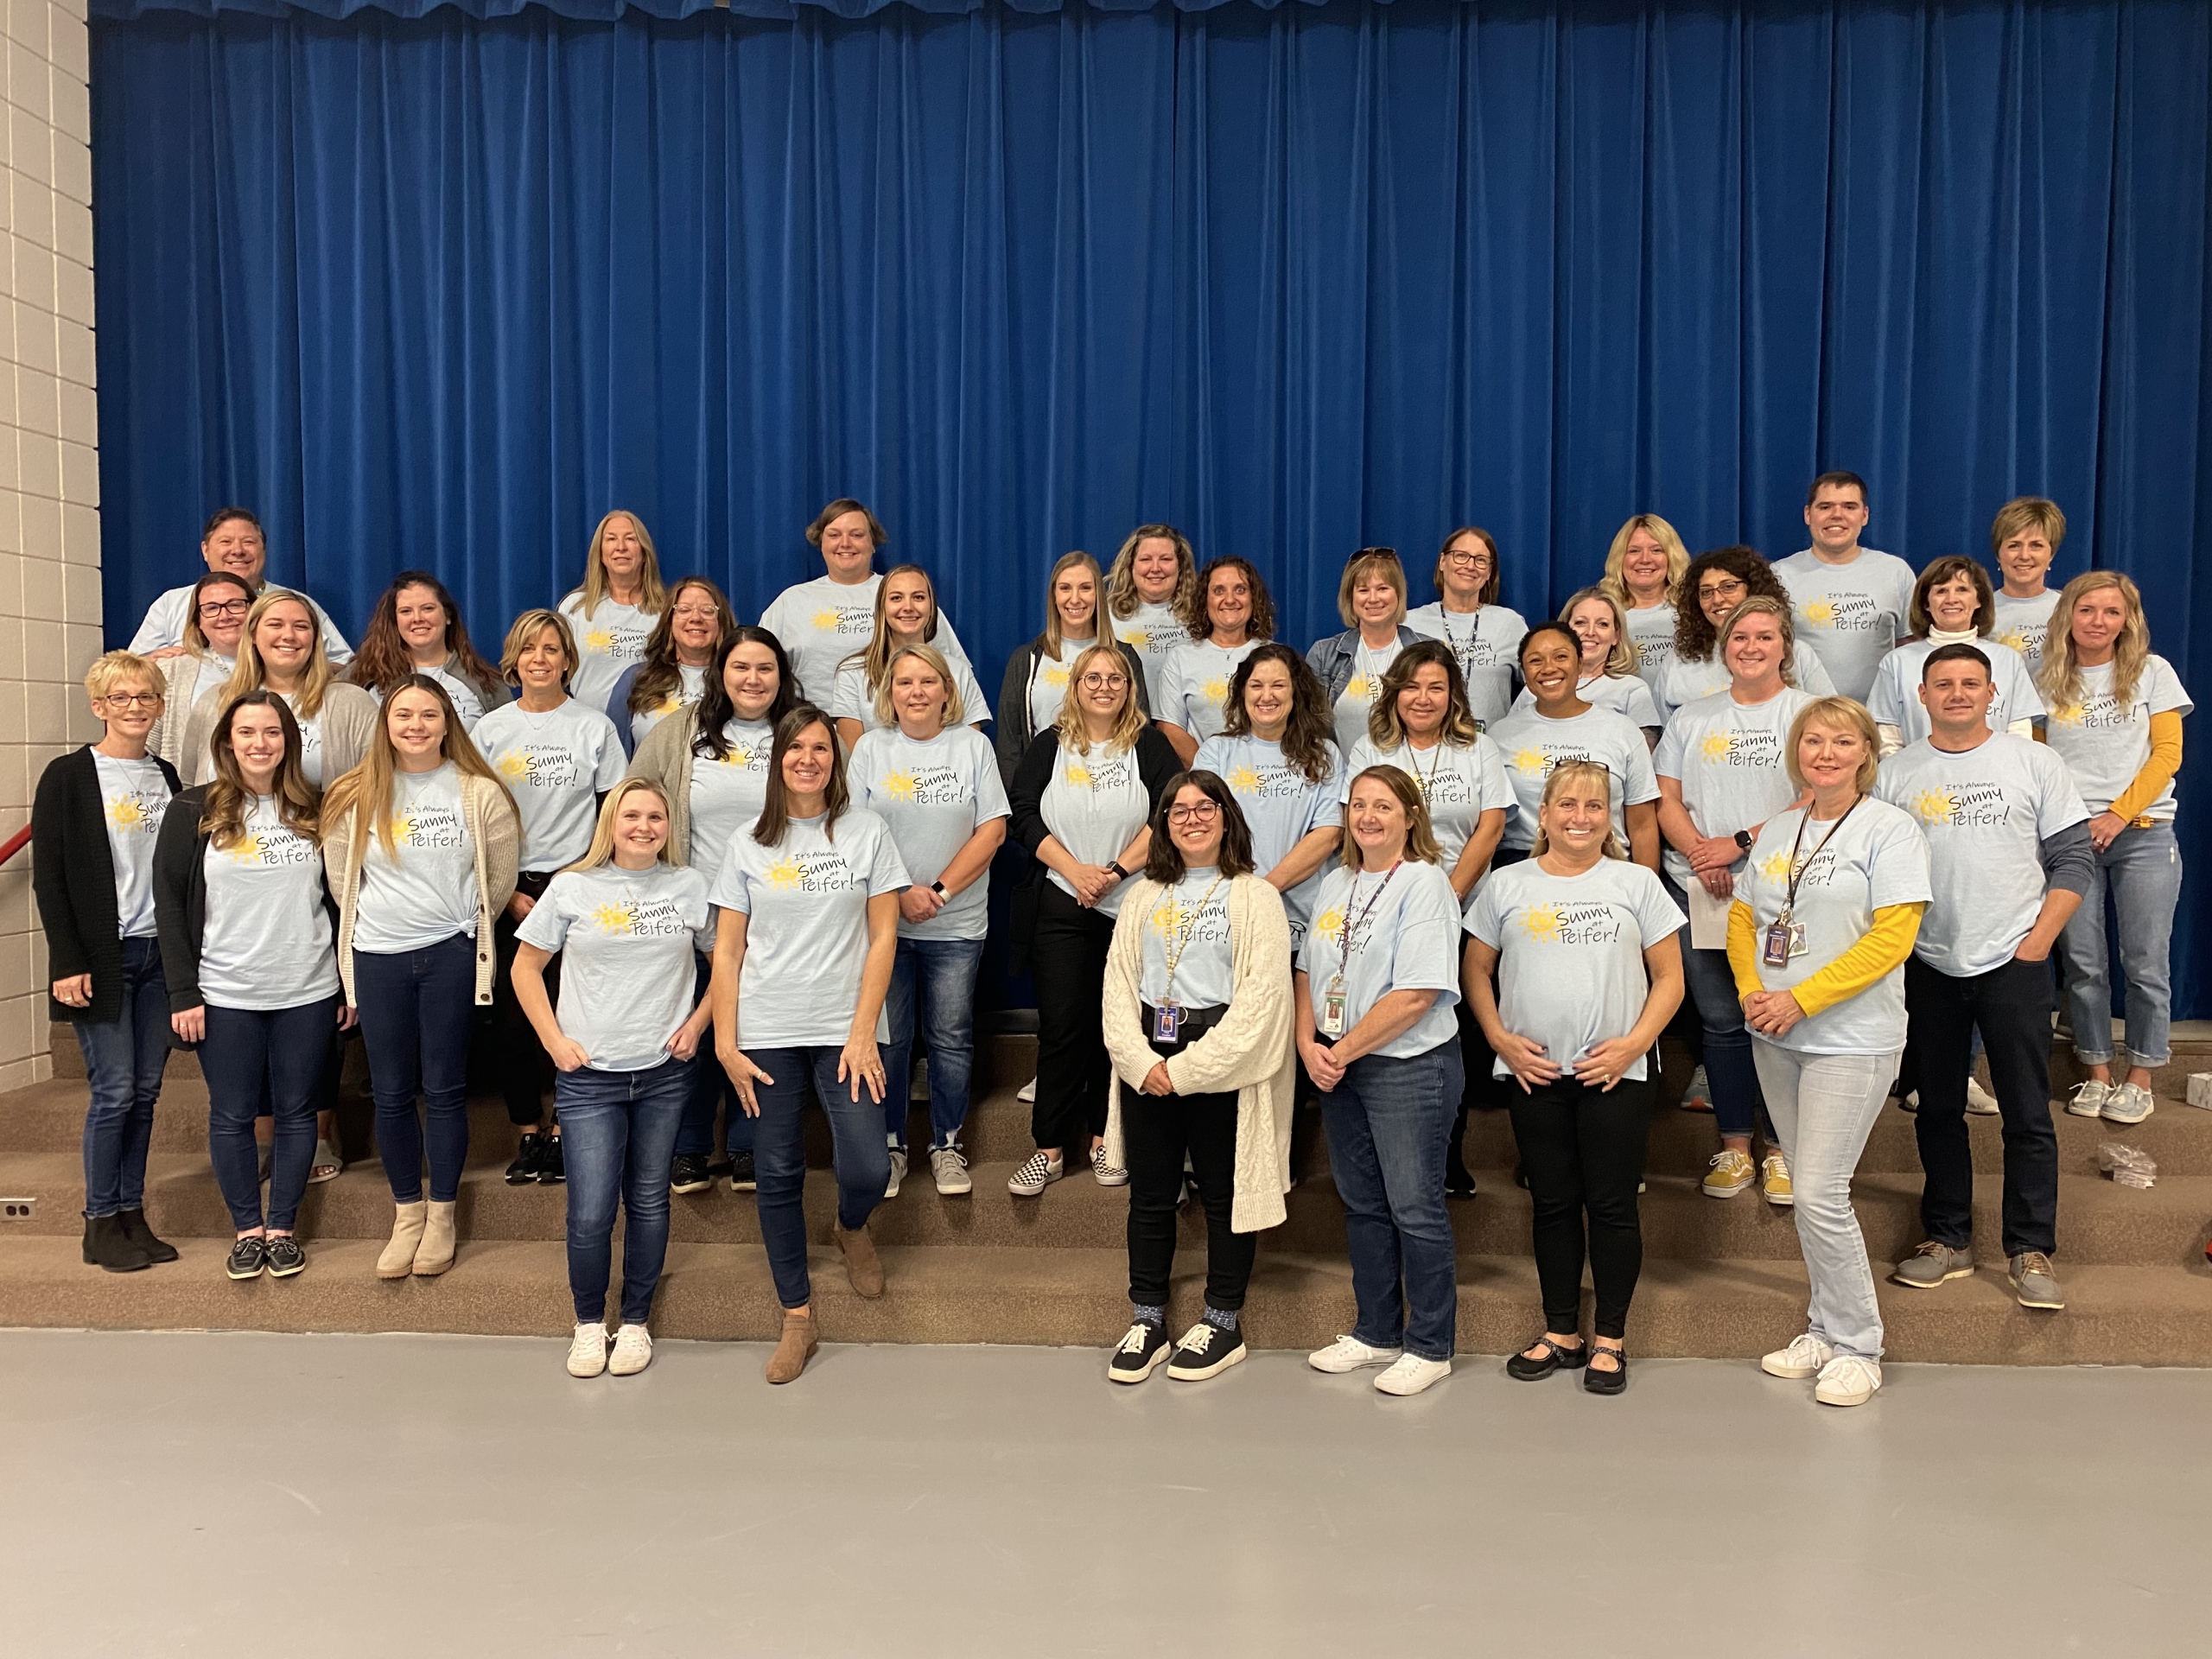 “It’s Always Sunny at Peifer” makes its once a month debut on Oct 4th, as many of the Peifer staff honor the memory of Mrs. Gercken.